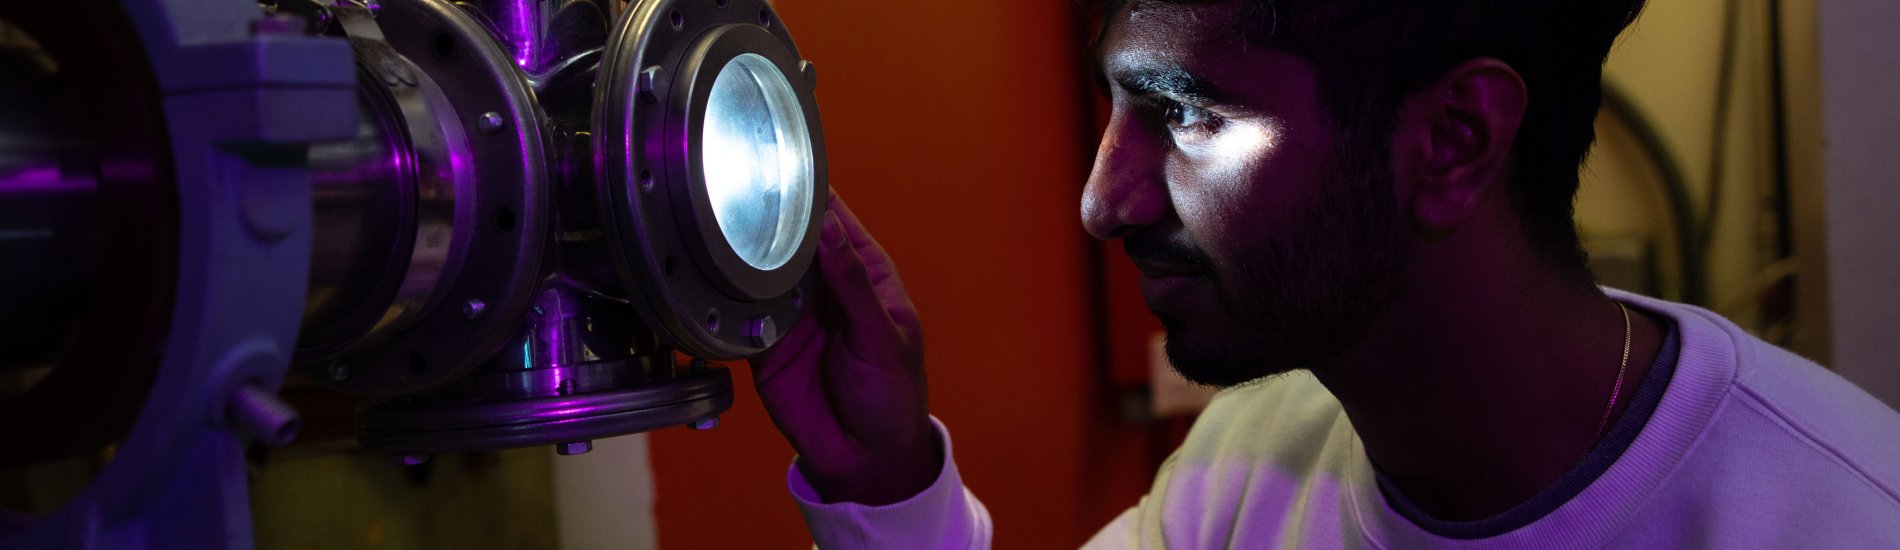 A student's face is lit up as he looks into a piece of lighted instrumentation.